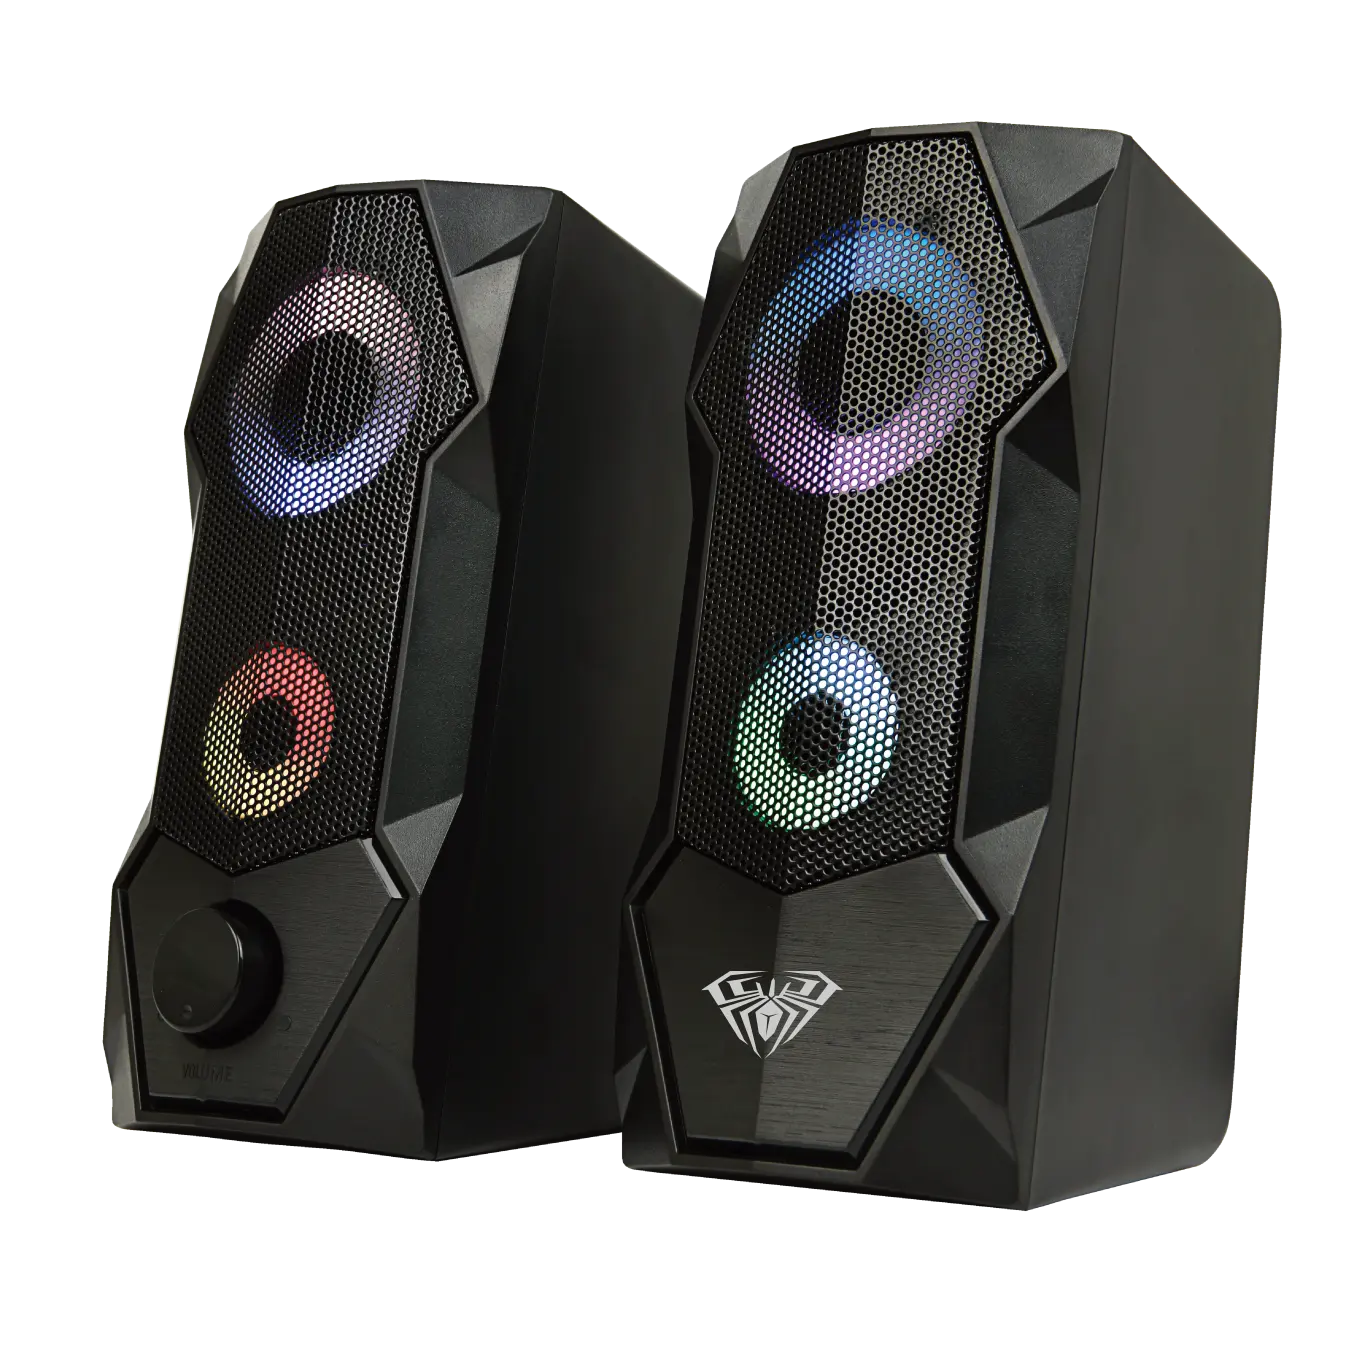 AULA N-301 Computer Speakers 2.0 Stereo Volume Control With RGB Light USB Powered For PC/Laptops/Desktops